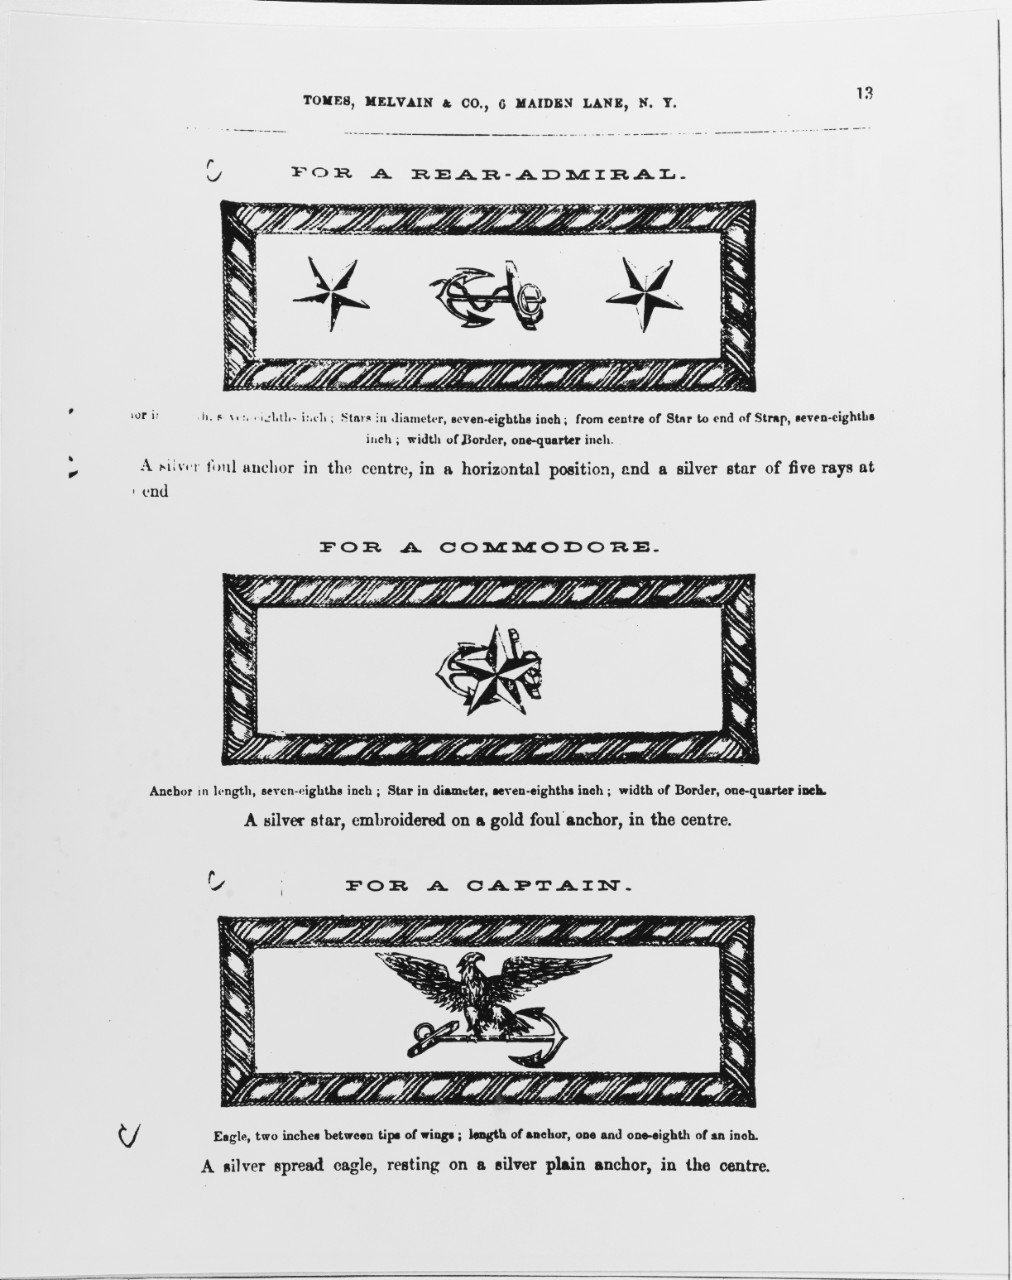 Uniform Regulations, 1864. Shoulder Insignia for a Rear Admiral, a Commodore and a Captain